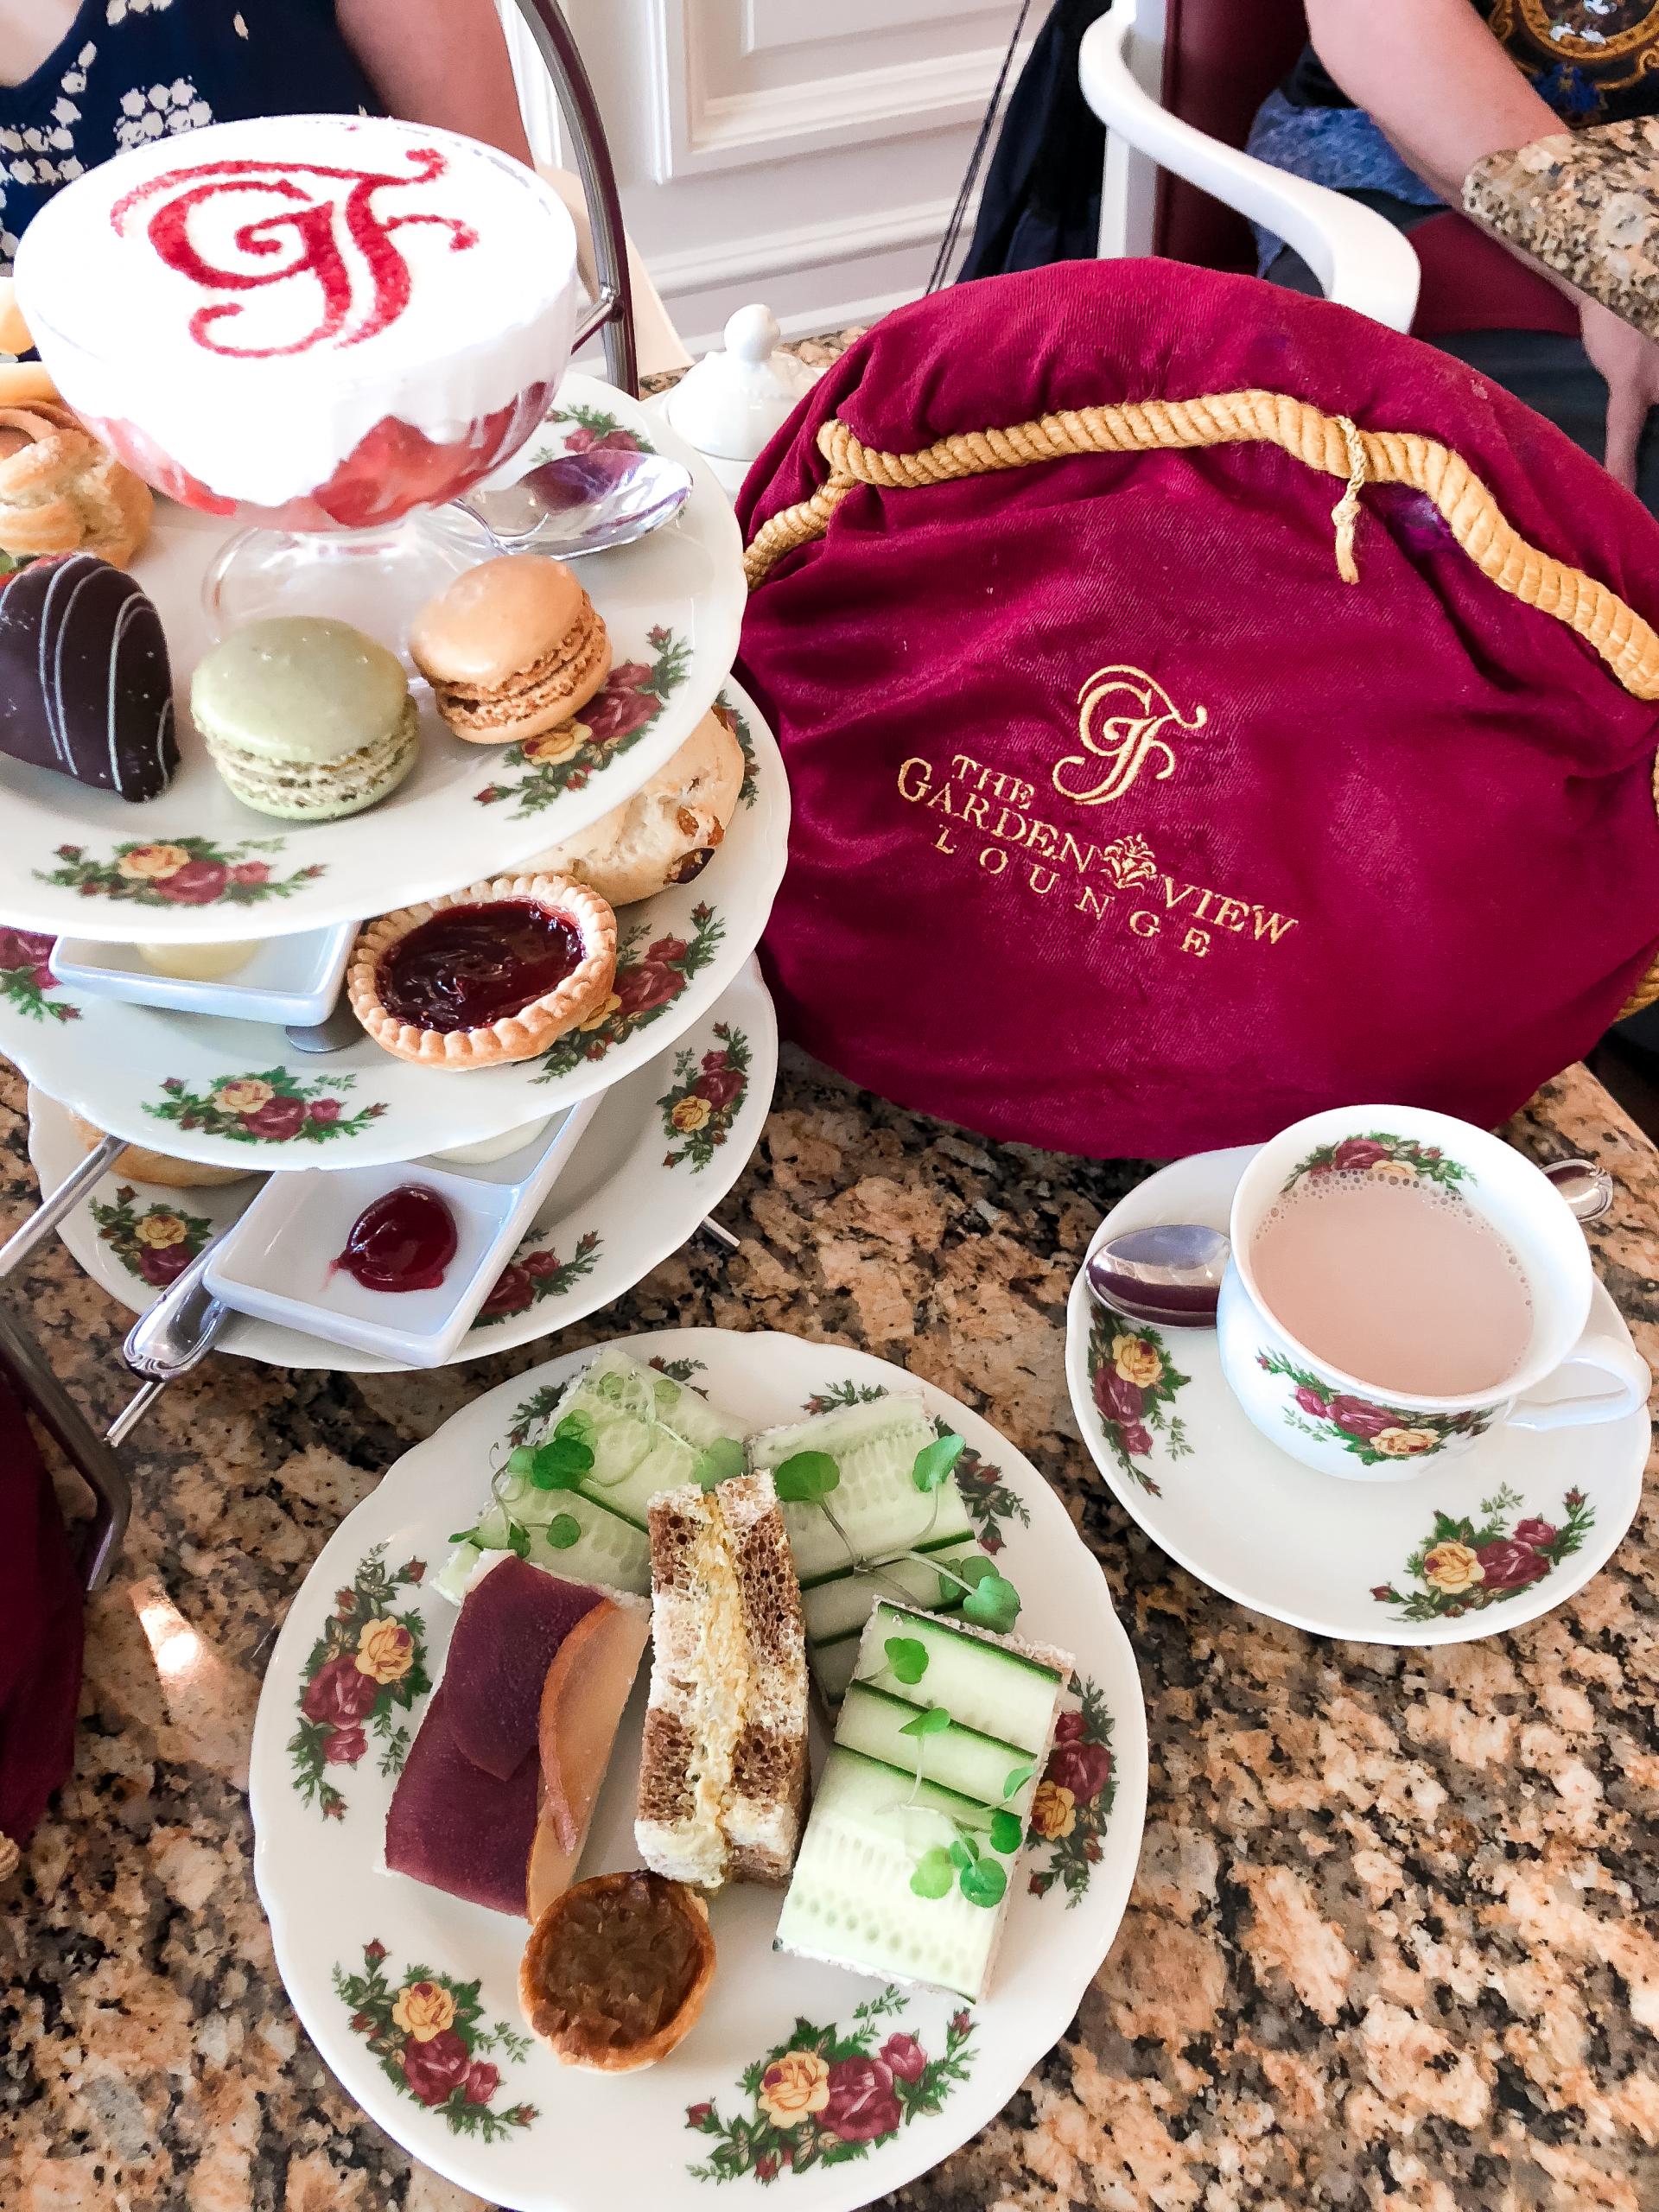 Afternoon tea at The Grand Floridian